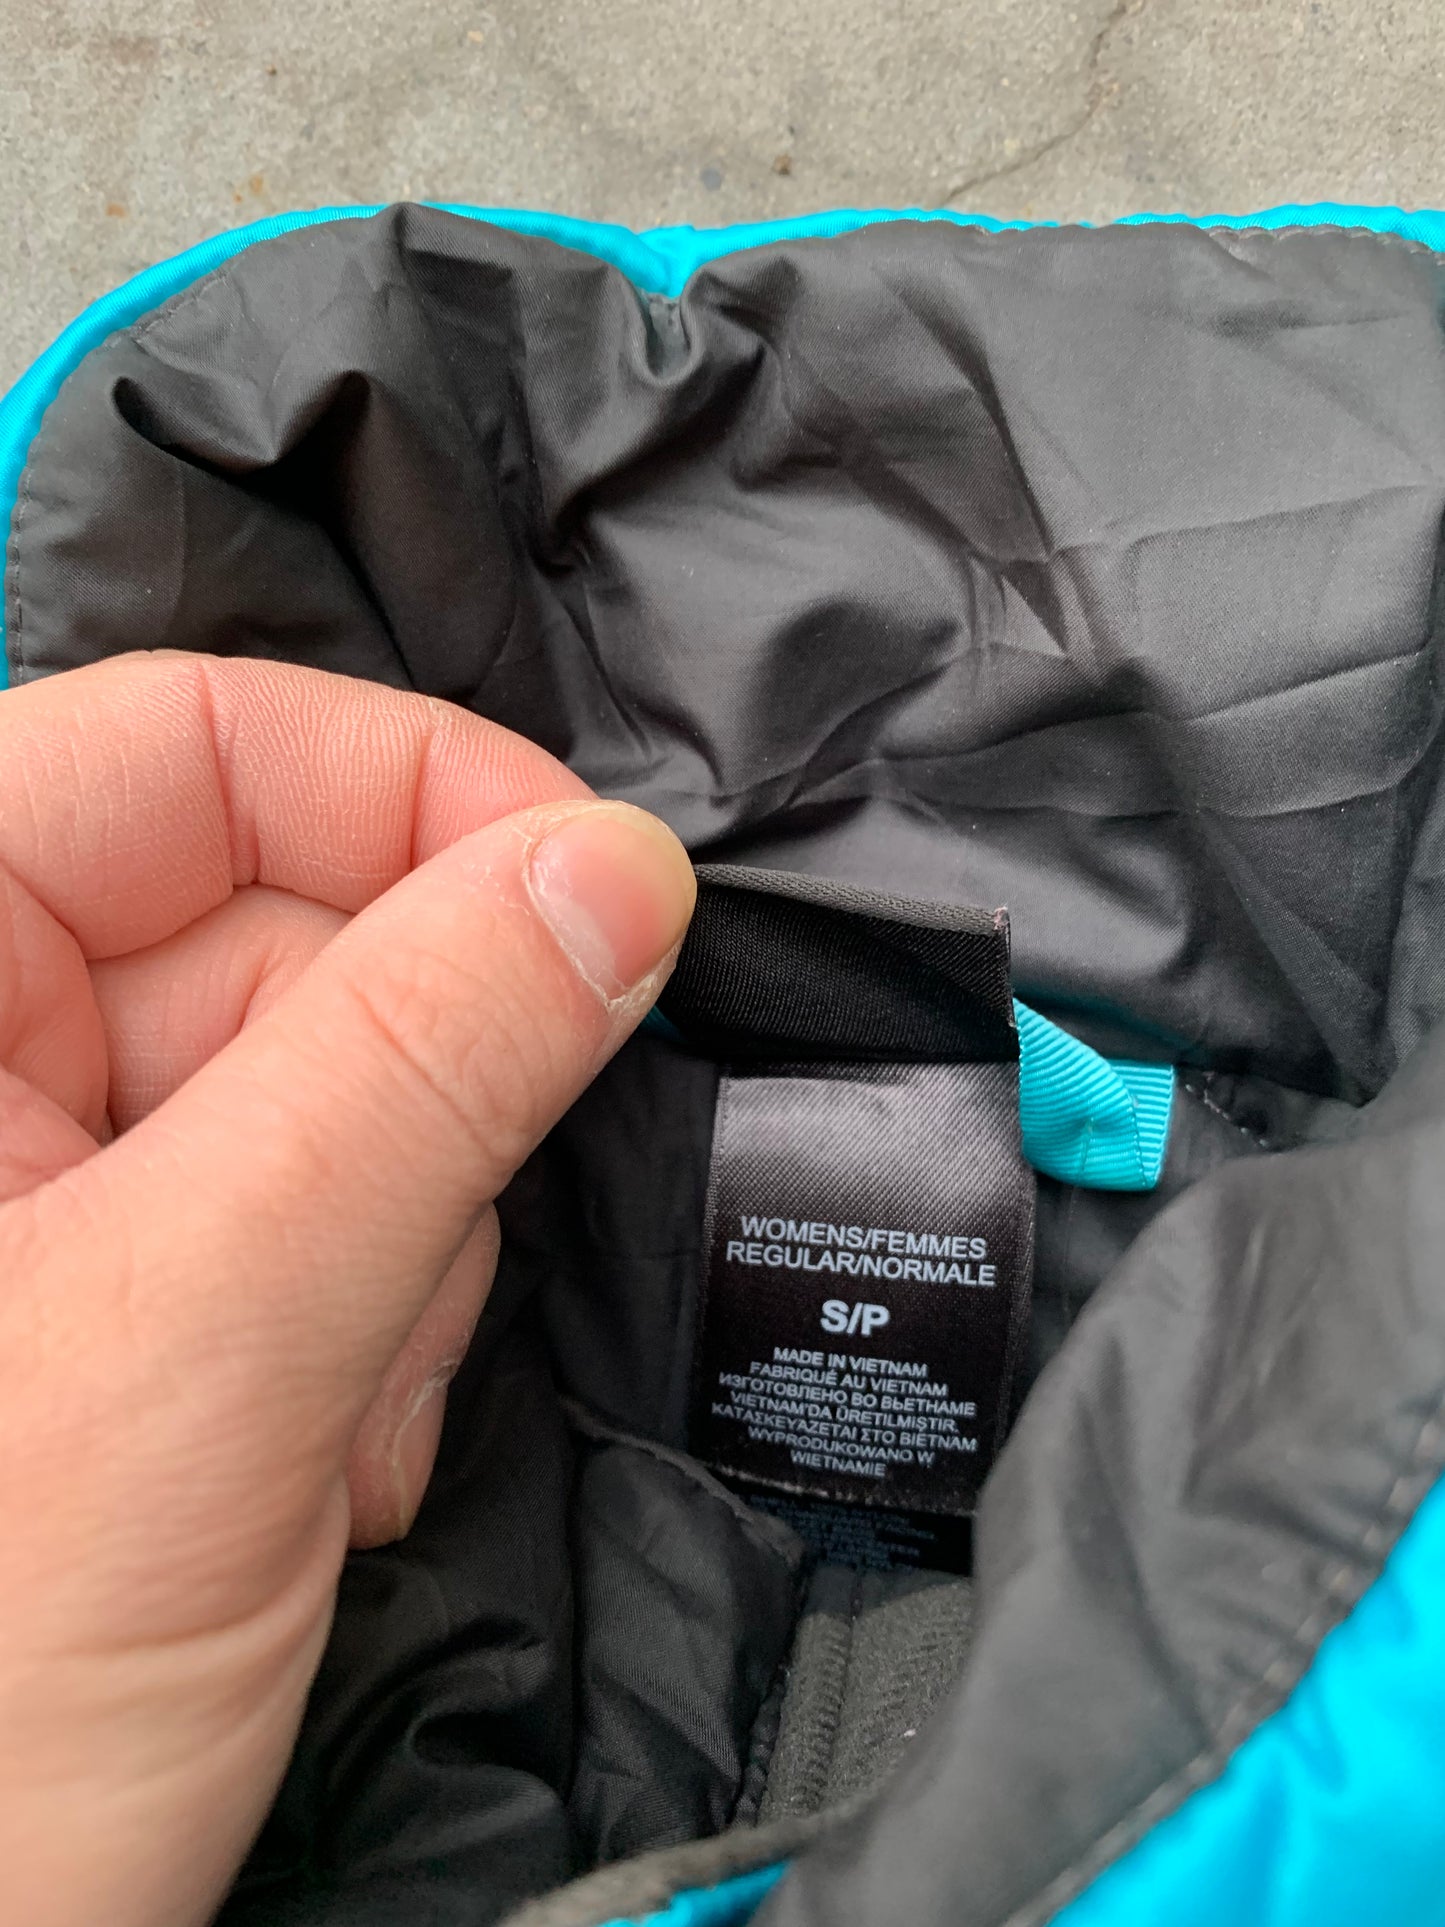 (S) The North Face Blue Puffer